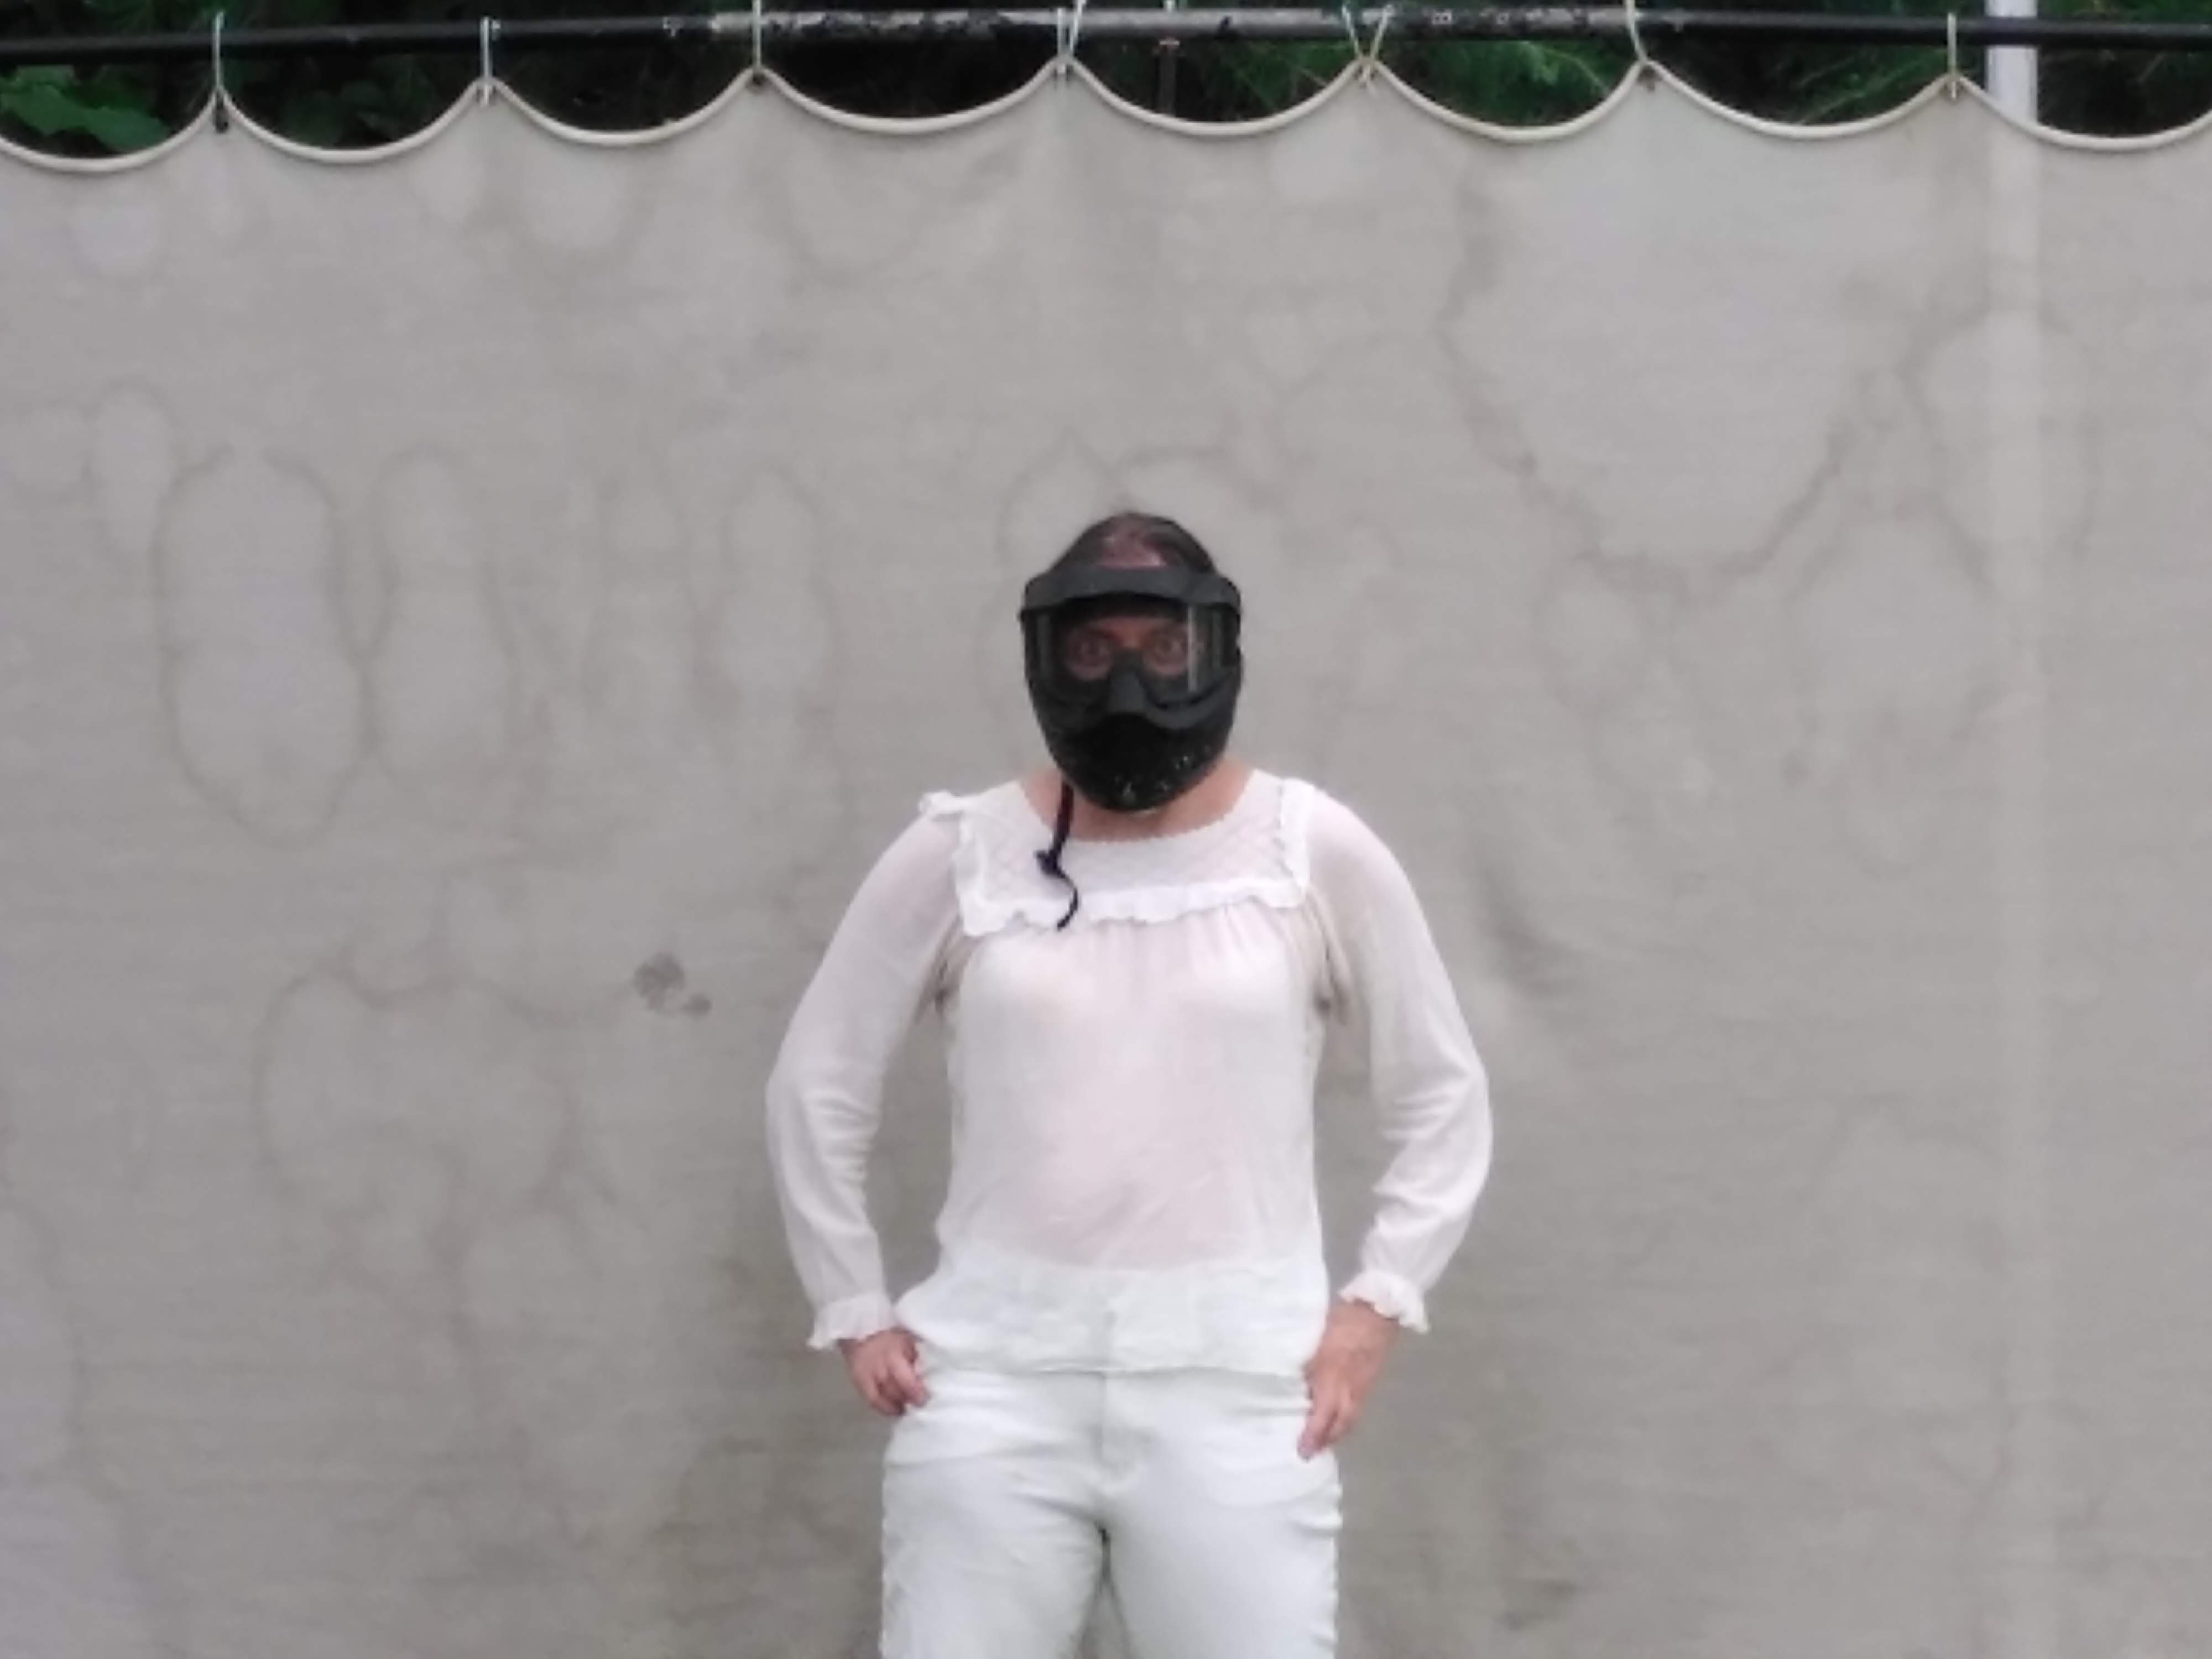 a woman in distance wearing white and in front of a white background. People closer to the screen seem to be aiming at her. In the second image we see a close up of the woman with her face covered with a black helmet.